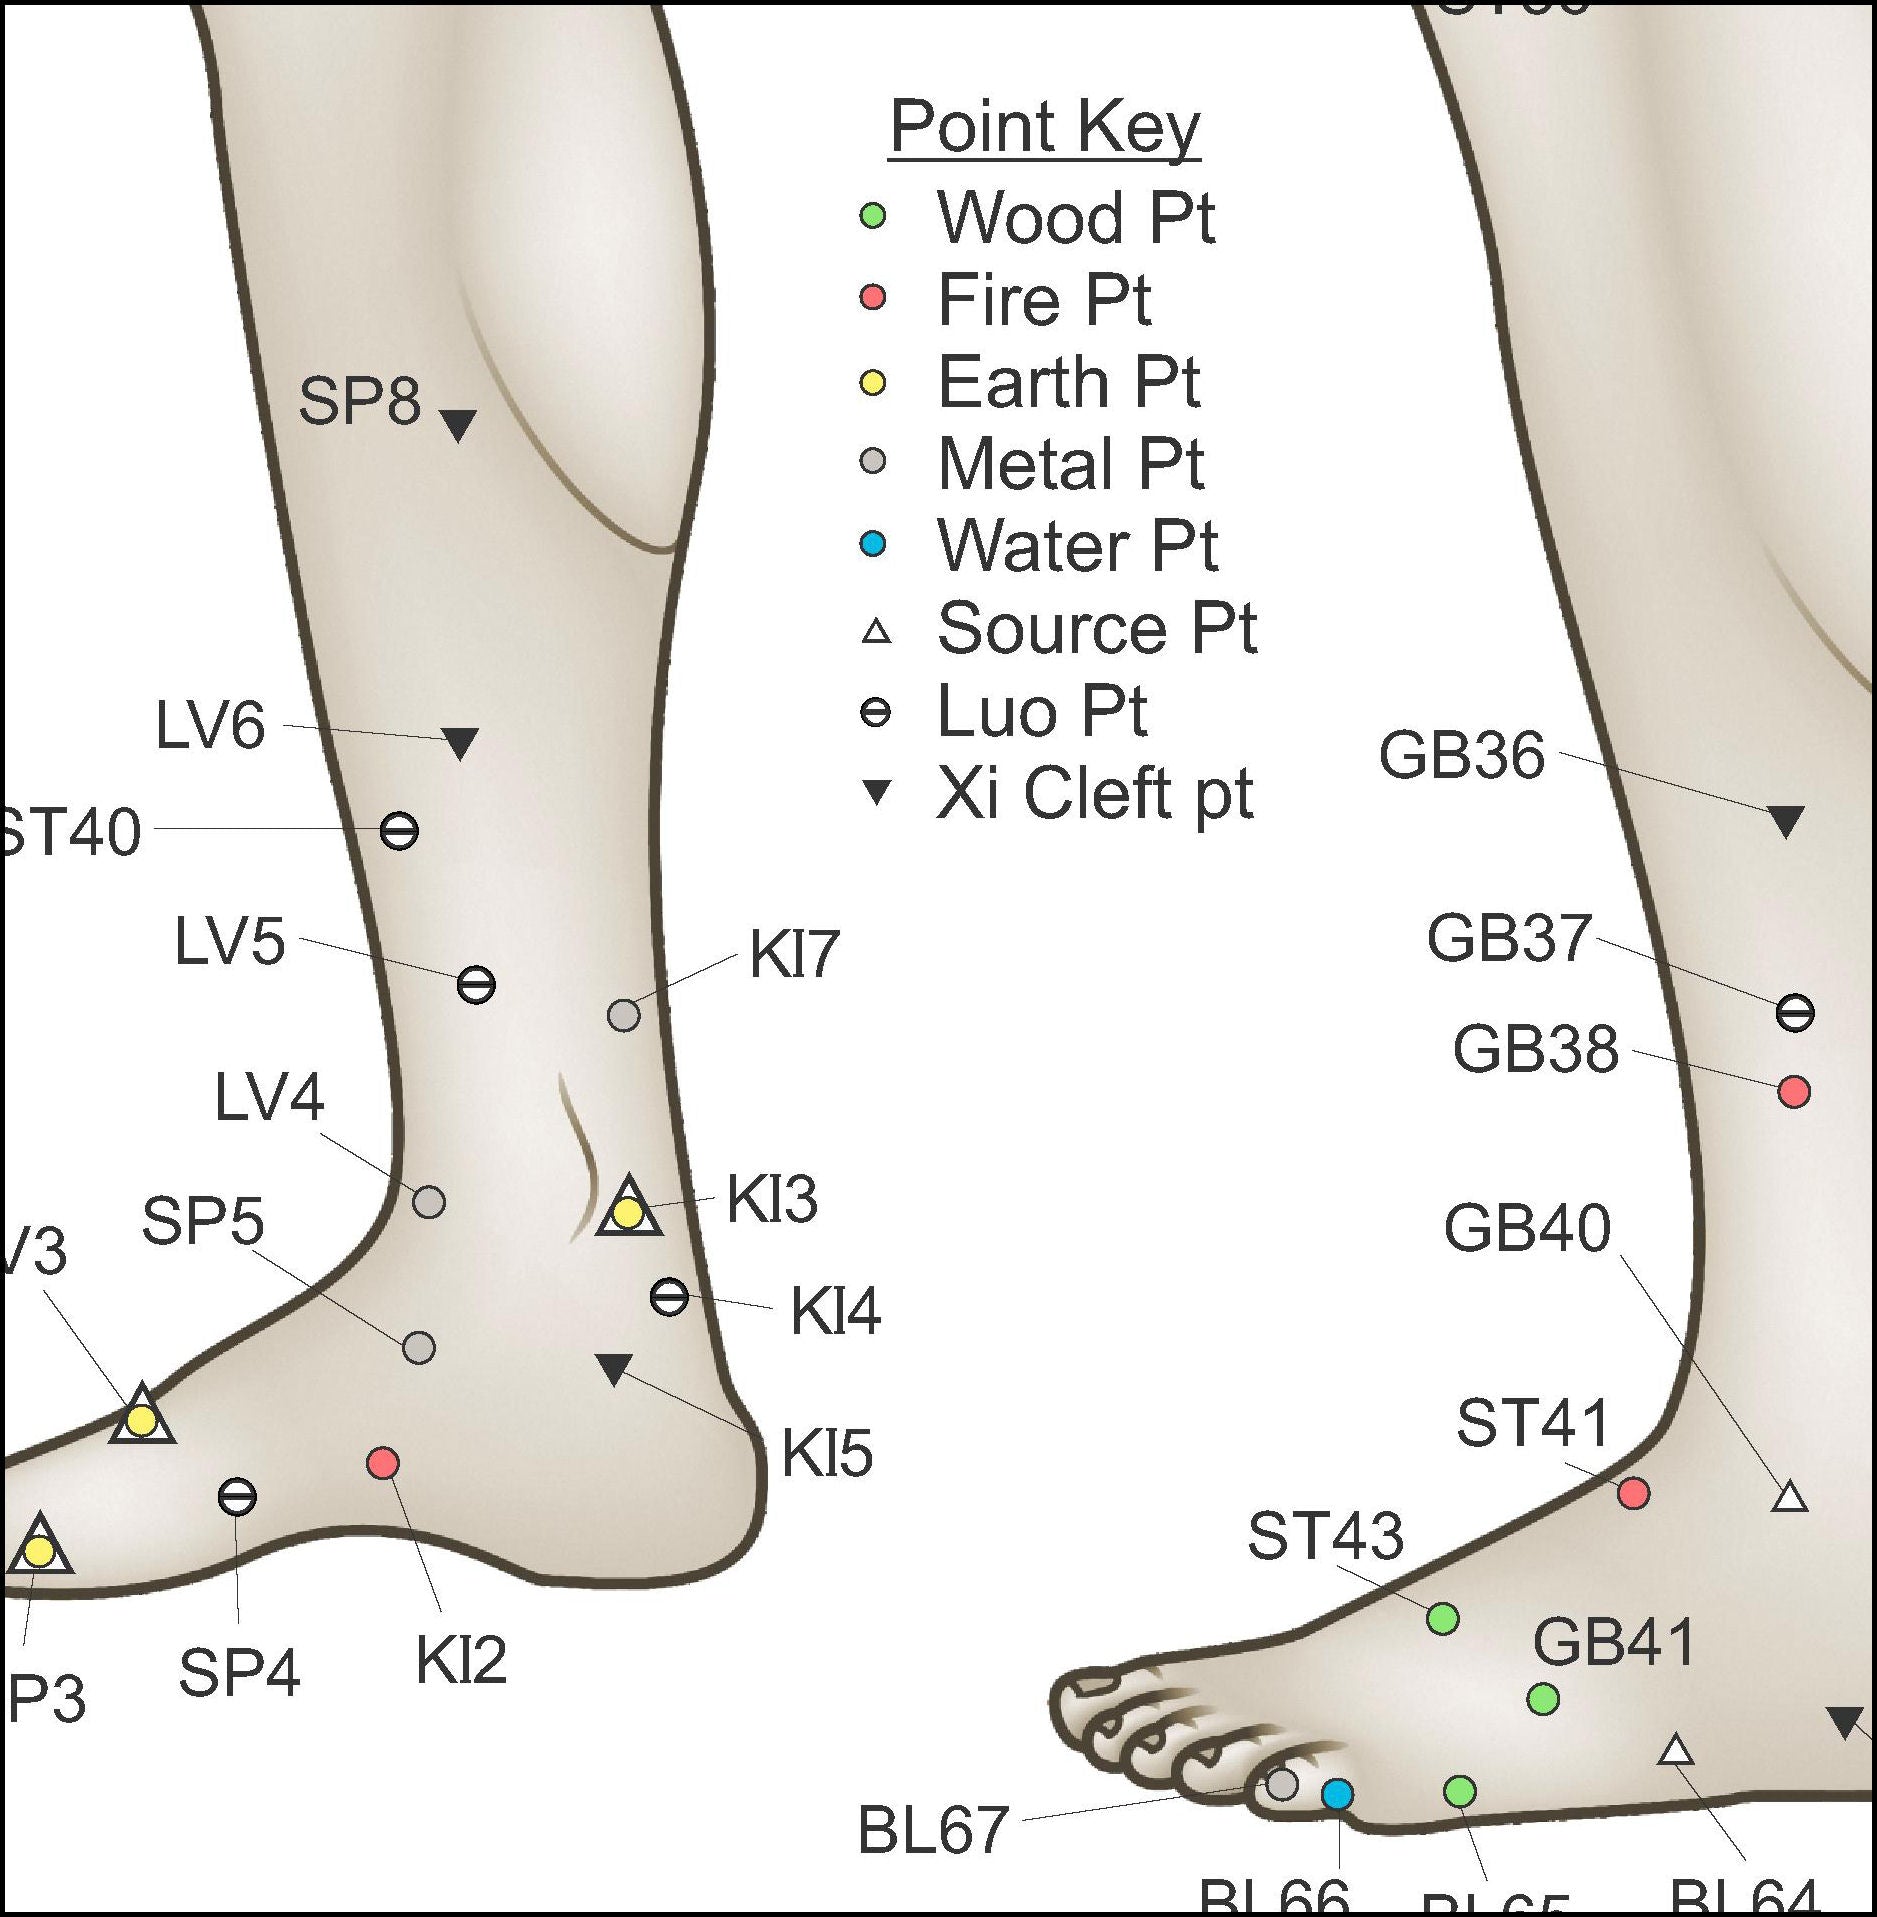 Acupuncture command points of the lower legs